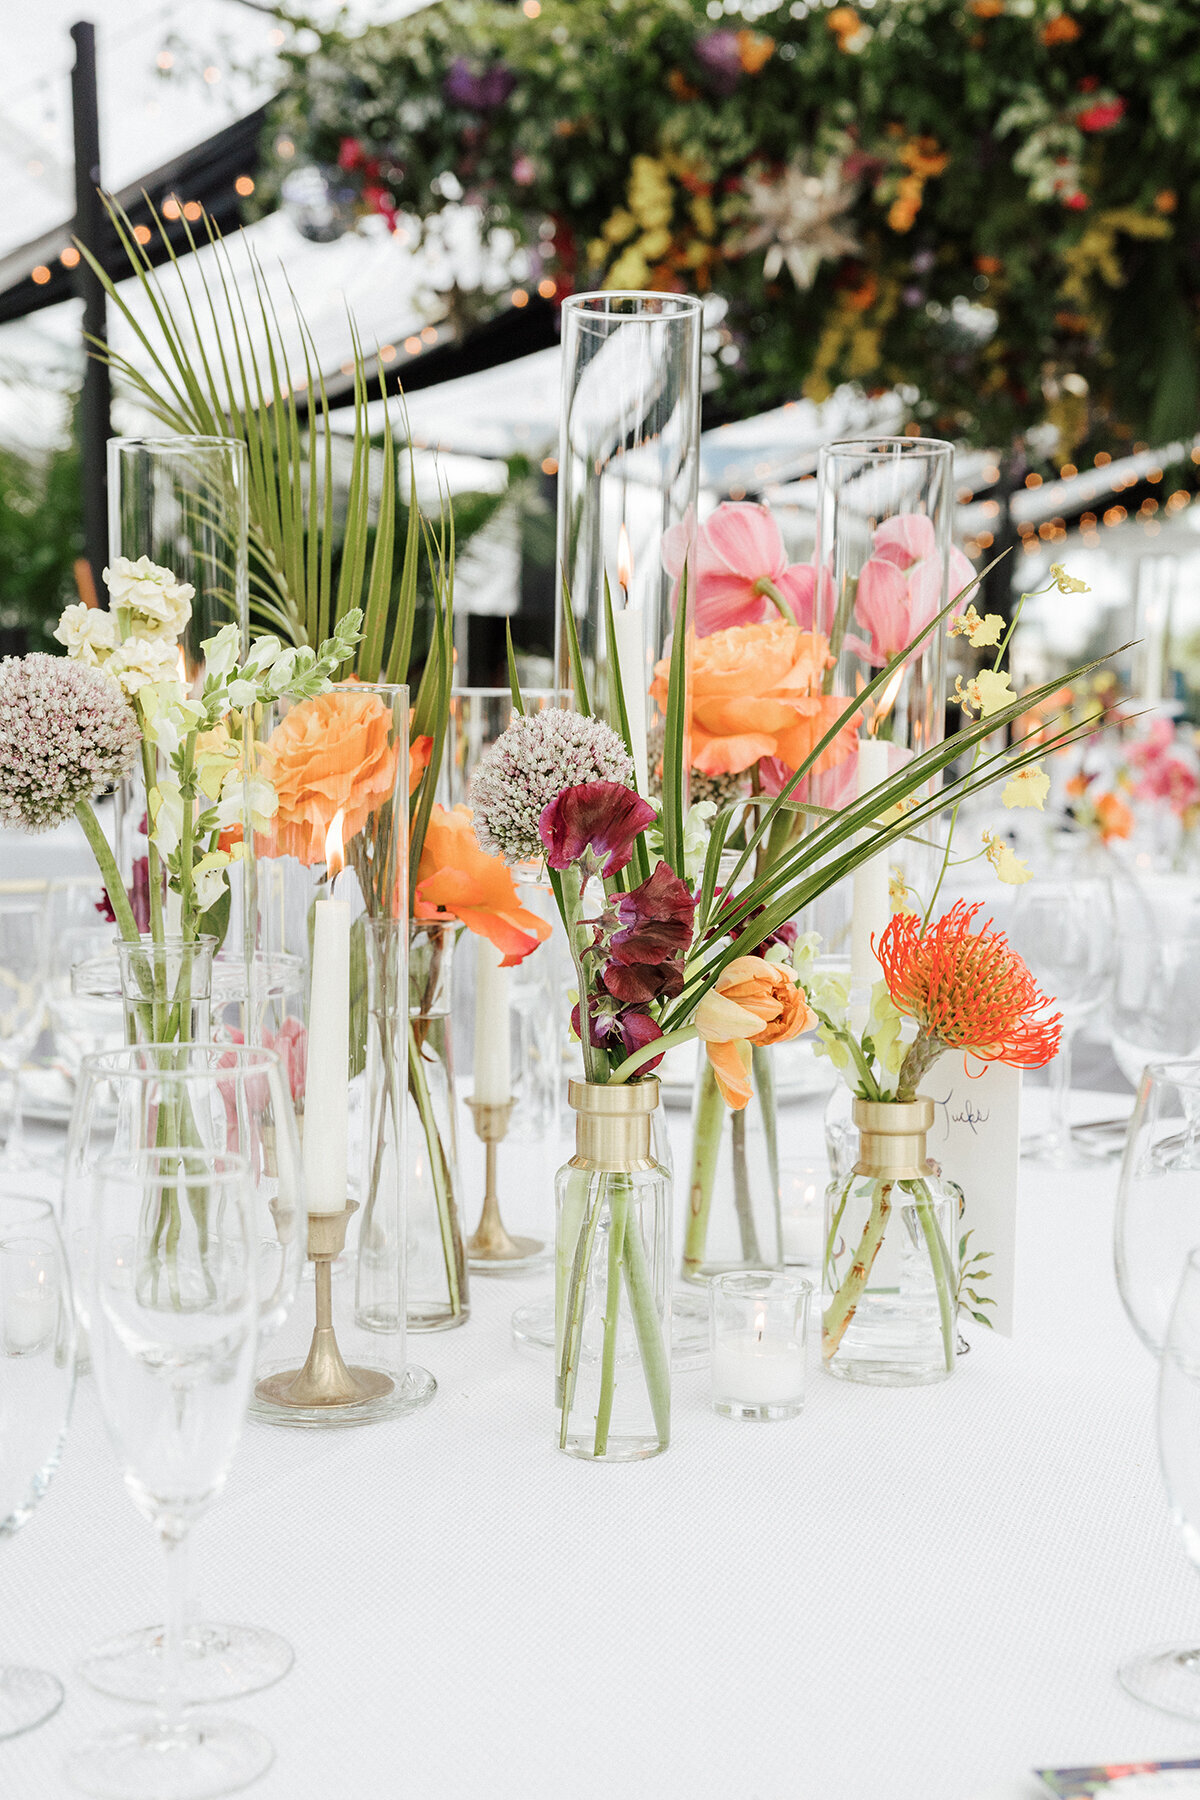 Sumner + Scott - New Orleans Museum of Art Wedding - Luxury Event Planning by Michelle Norwood - 39